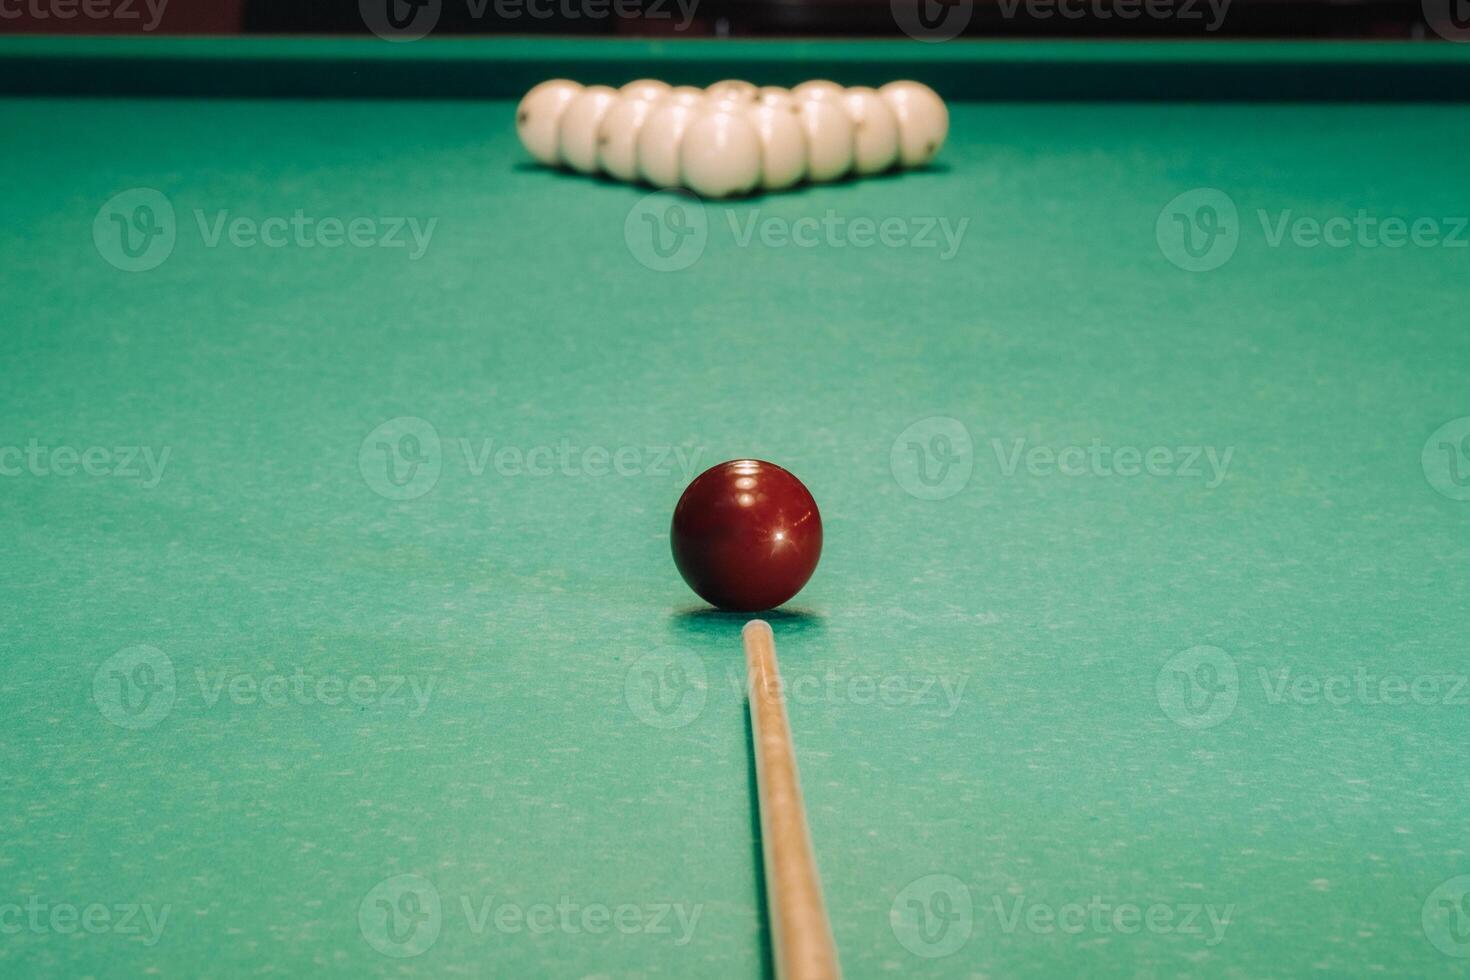 Start of the game of billiards on the green table.The balls are arranged in a triangle on the table photo